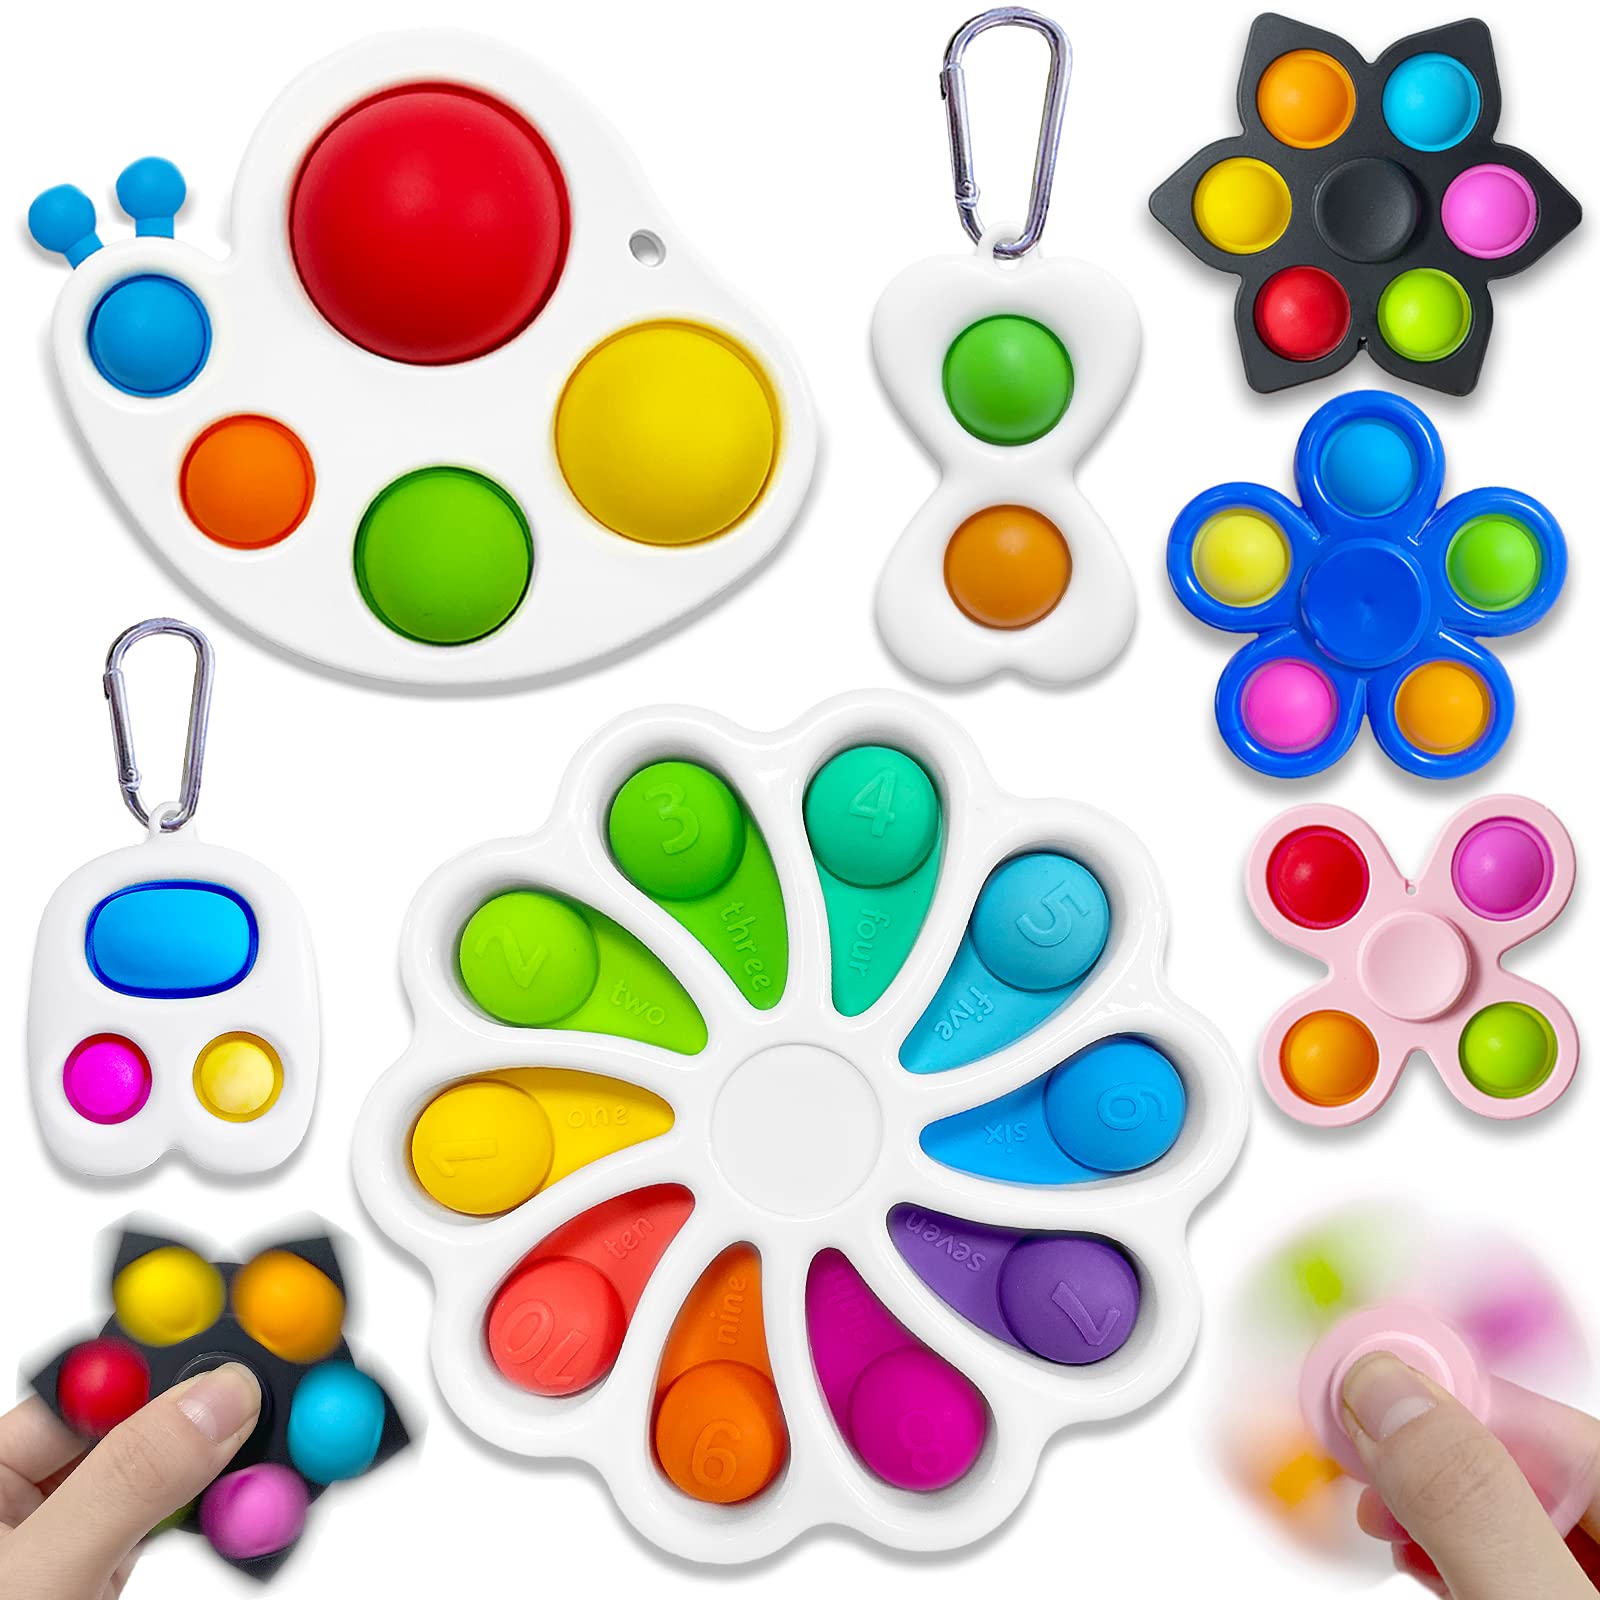 Simple Dimple Pack, Fidget Spinners Flower Pop Bubble Toy for Stress Relief and ADHD, Novelty Gift for Rewards Kids Birthday Party